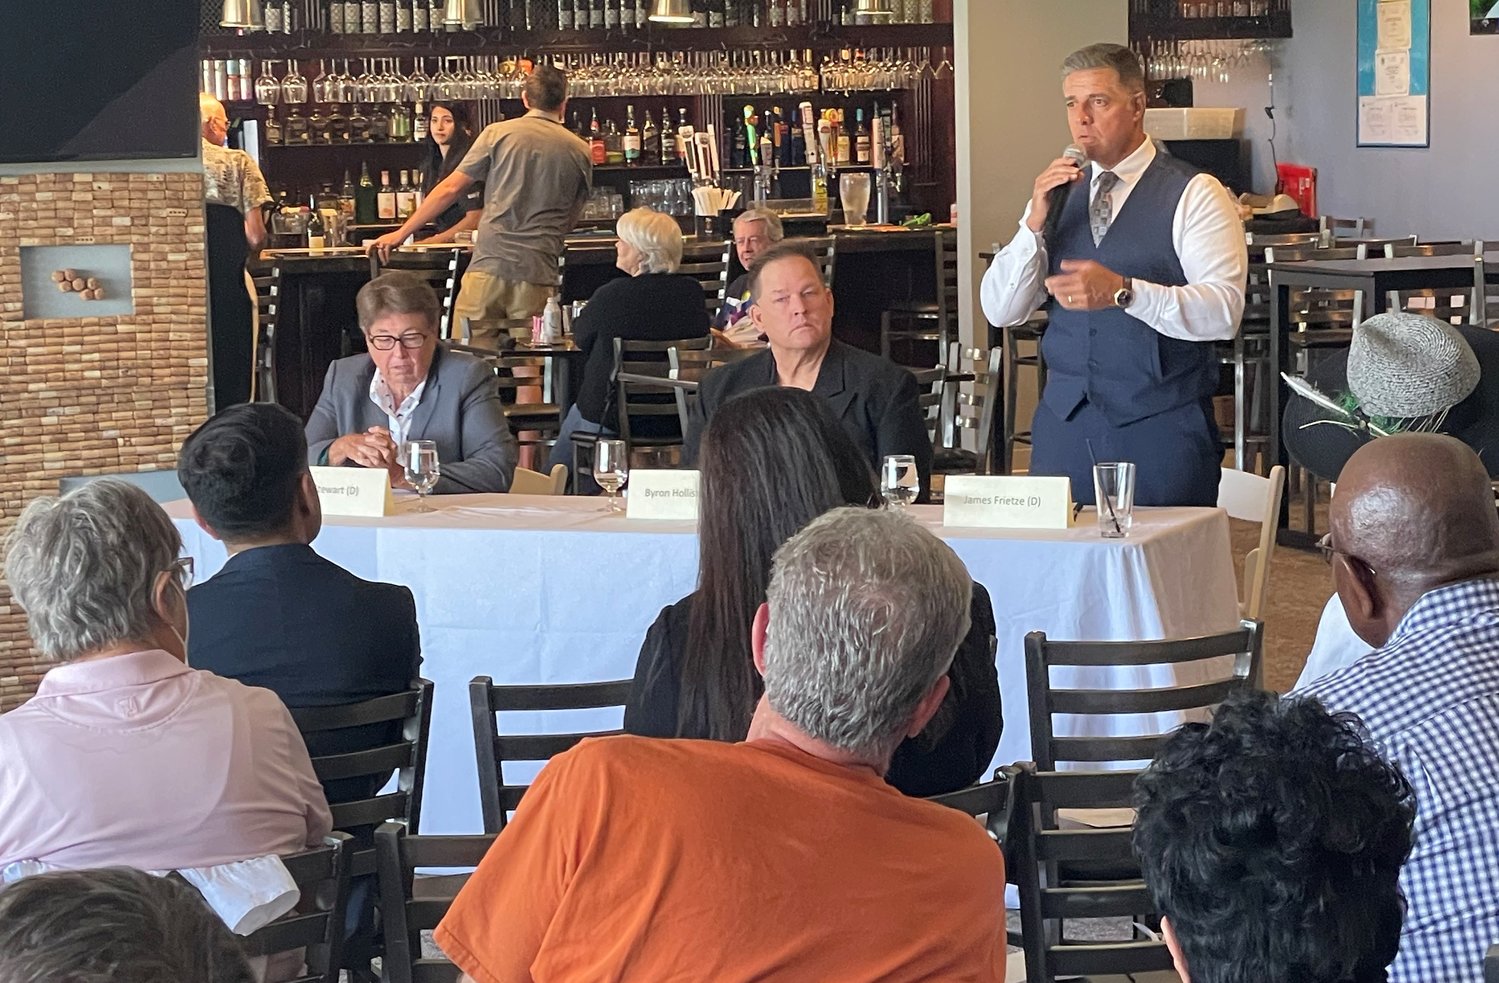 James Frietze, a candidate for Doña Ana County sheriff in the June 7 Democratic primary, speaks at the Picacho Hills Property Owners Association May 17 candidate forum. Other candidates for county sheriff at the forum were incumbent Sheriff Kim Stewart, who is also a Democratic, and Republican Byron Hollister.